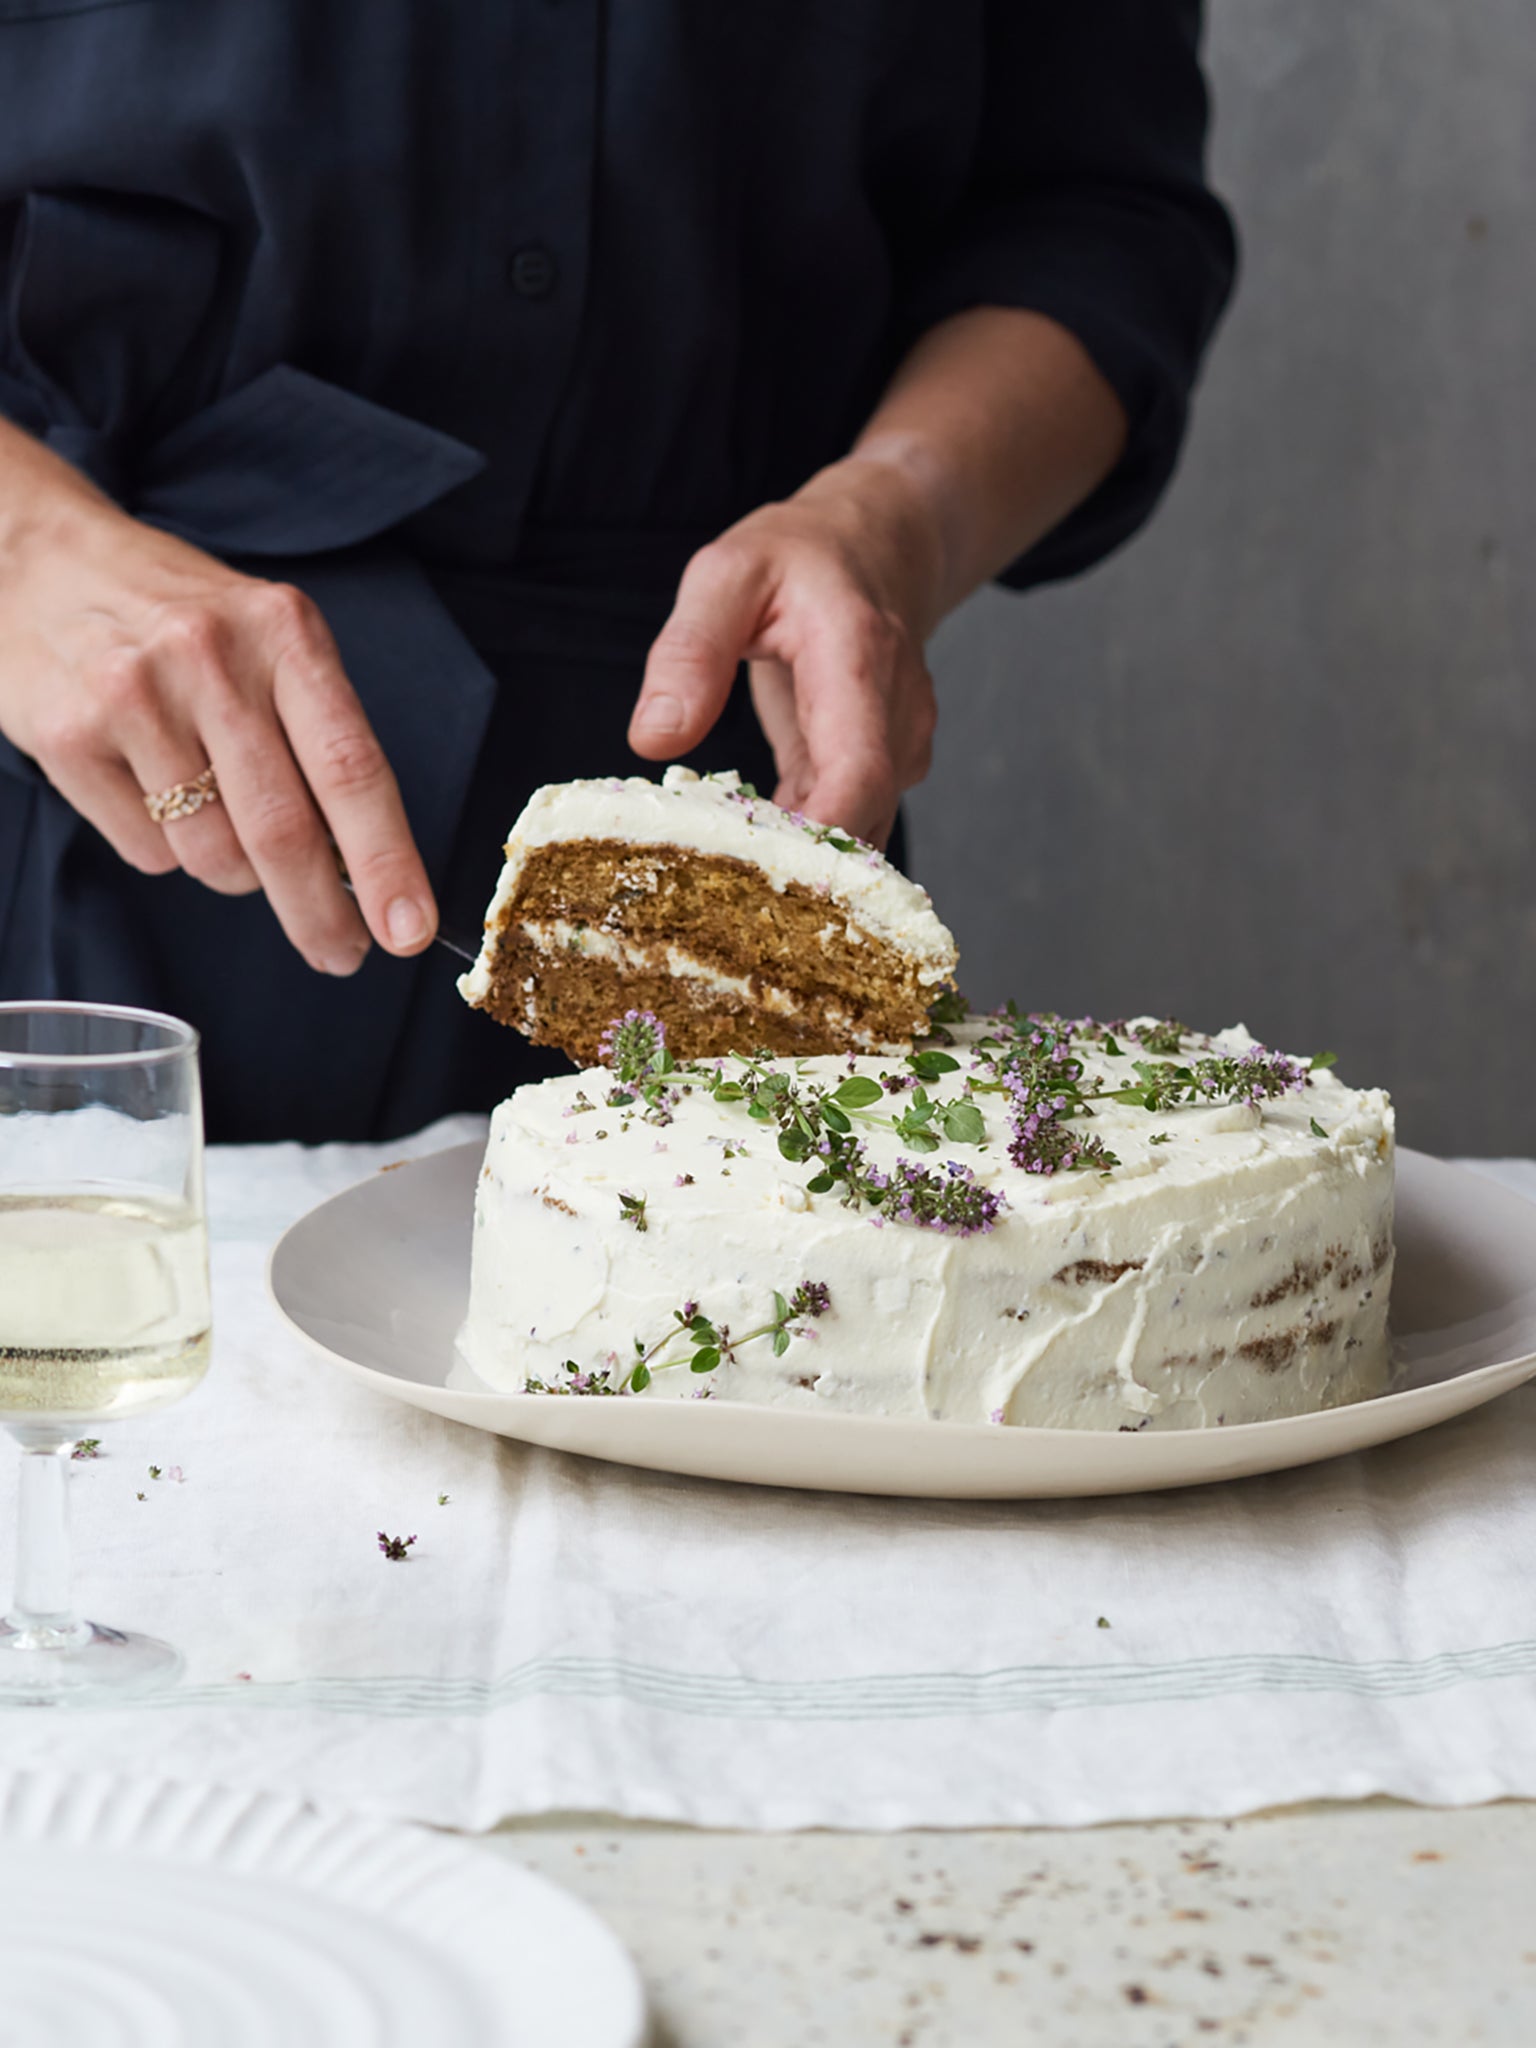 Courgette cake with lime and buttercream: very simple and not nearly as odd as it sounds